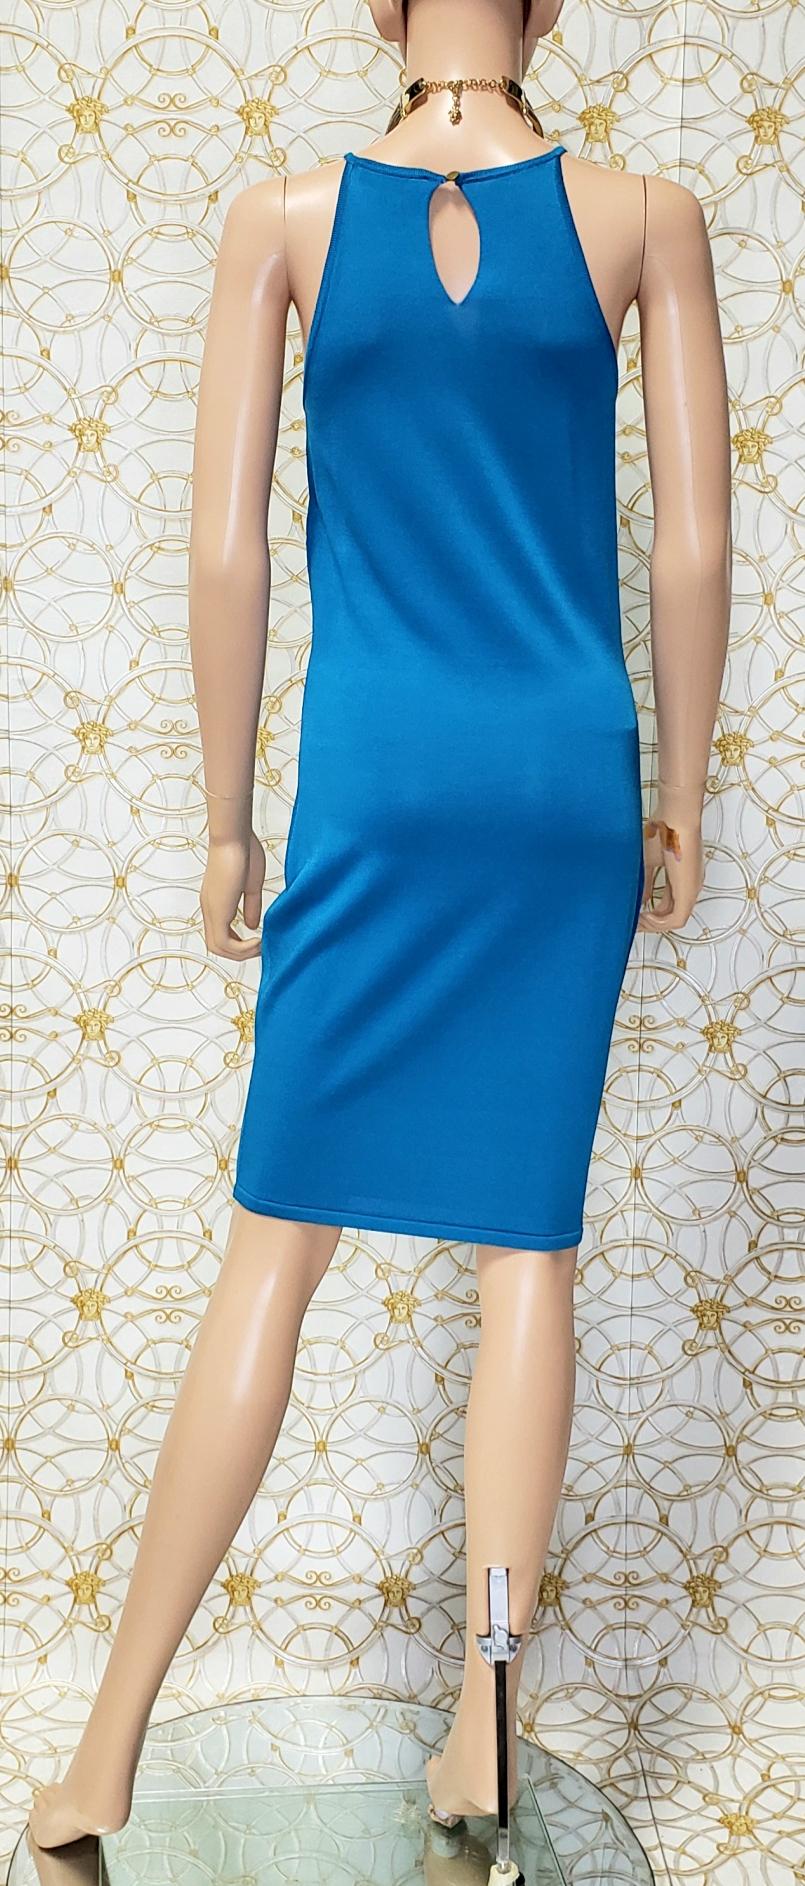 Blue NEW VERSACE COLLECTION BLUE KNIT SLEEVELESS Dress 38 - 2 For Sale